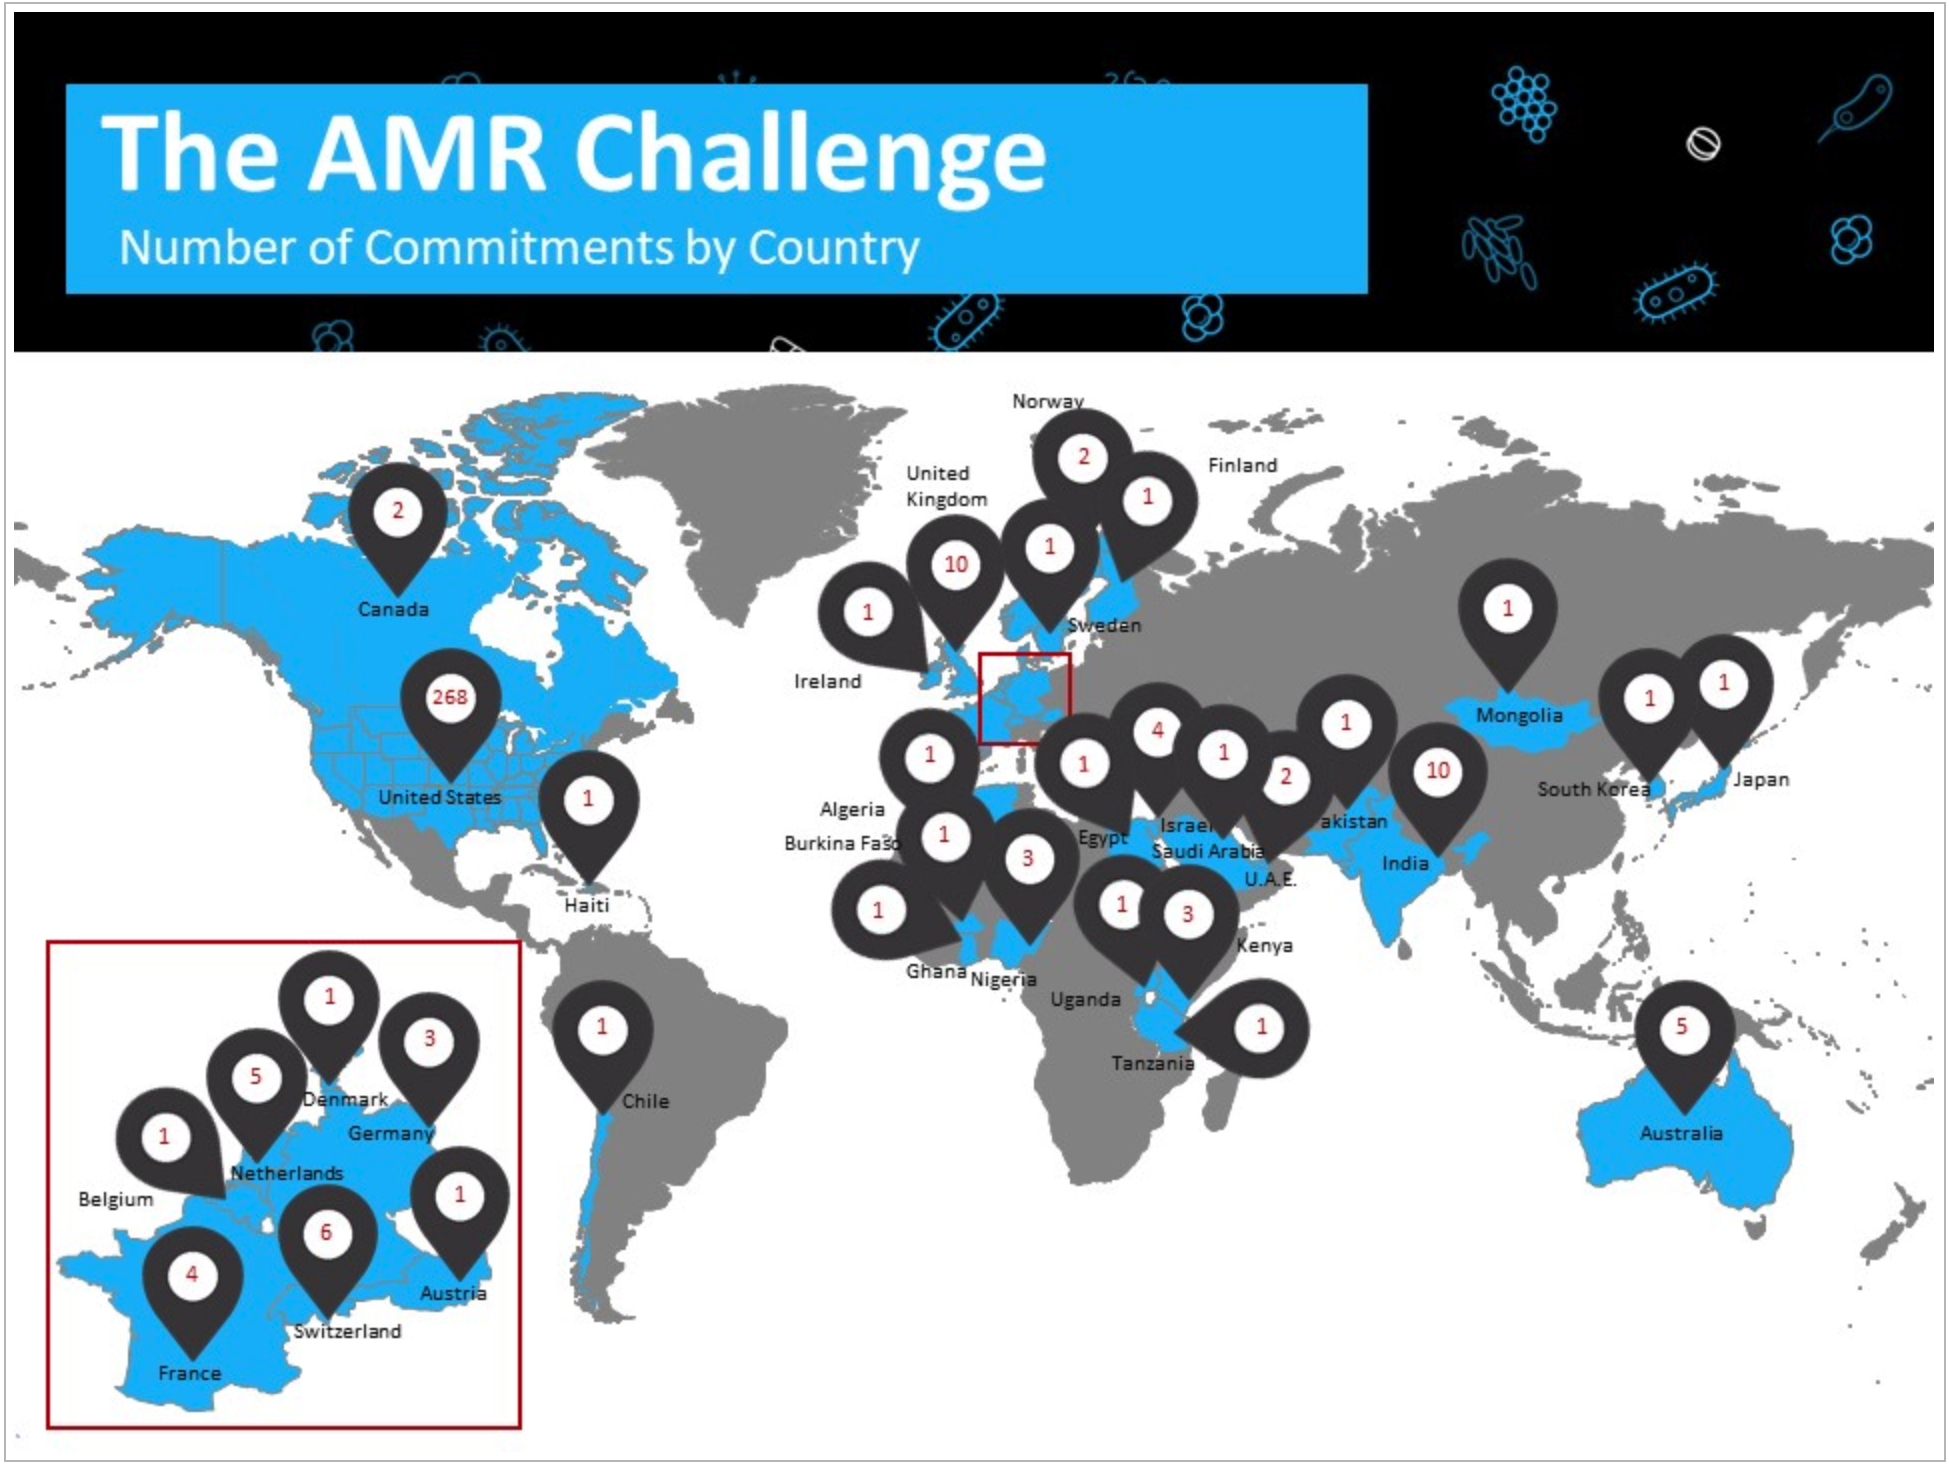 Global Participation: Countries that made commitments to the AMR challenge (as of December 11, 2019). Credit: CDC 